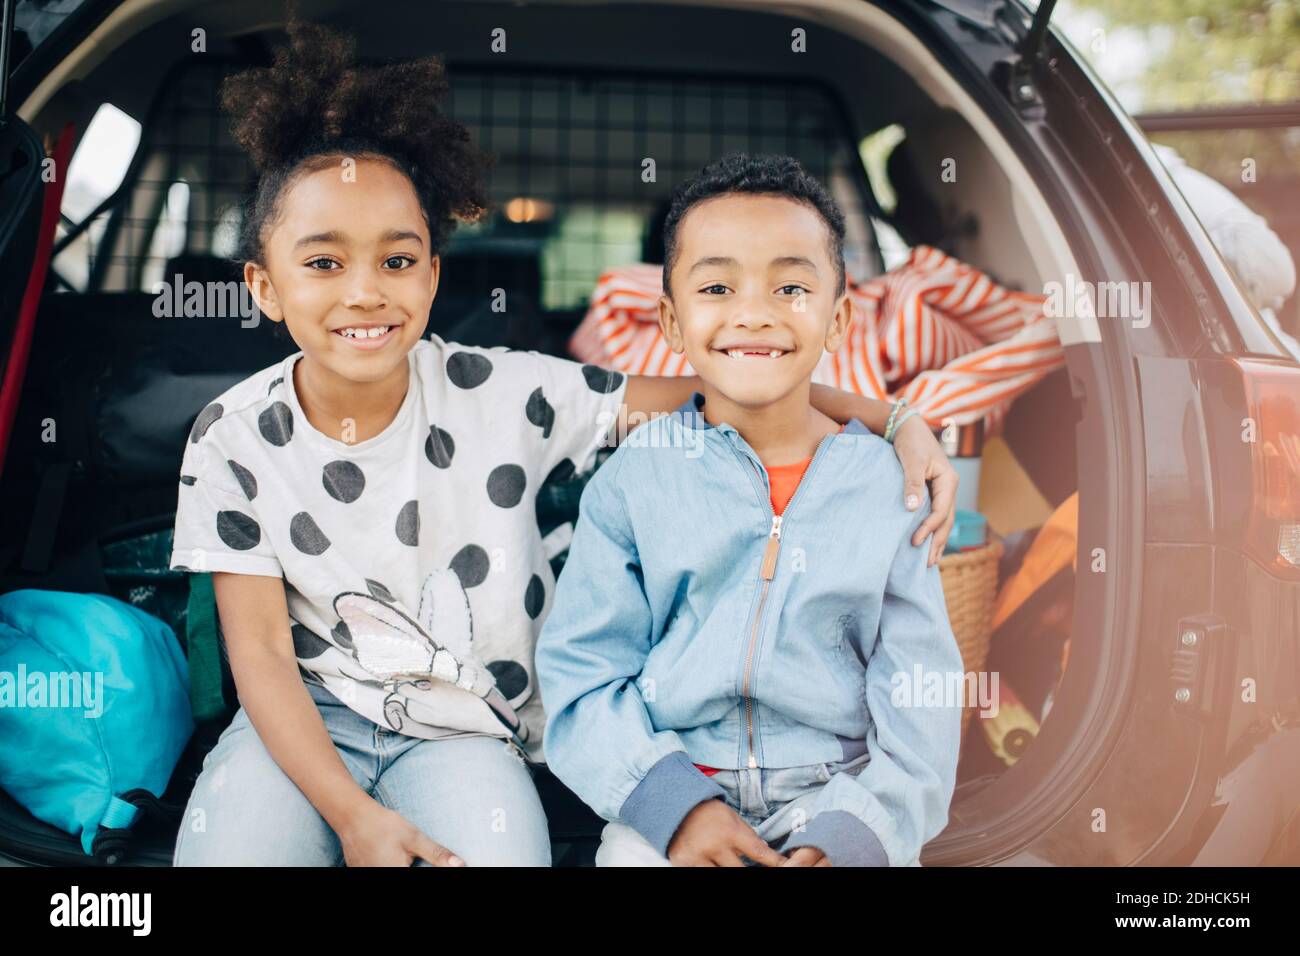 Portrait of smiling girl sitting with arm around on brother in electric car trunk Stock Photo